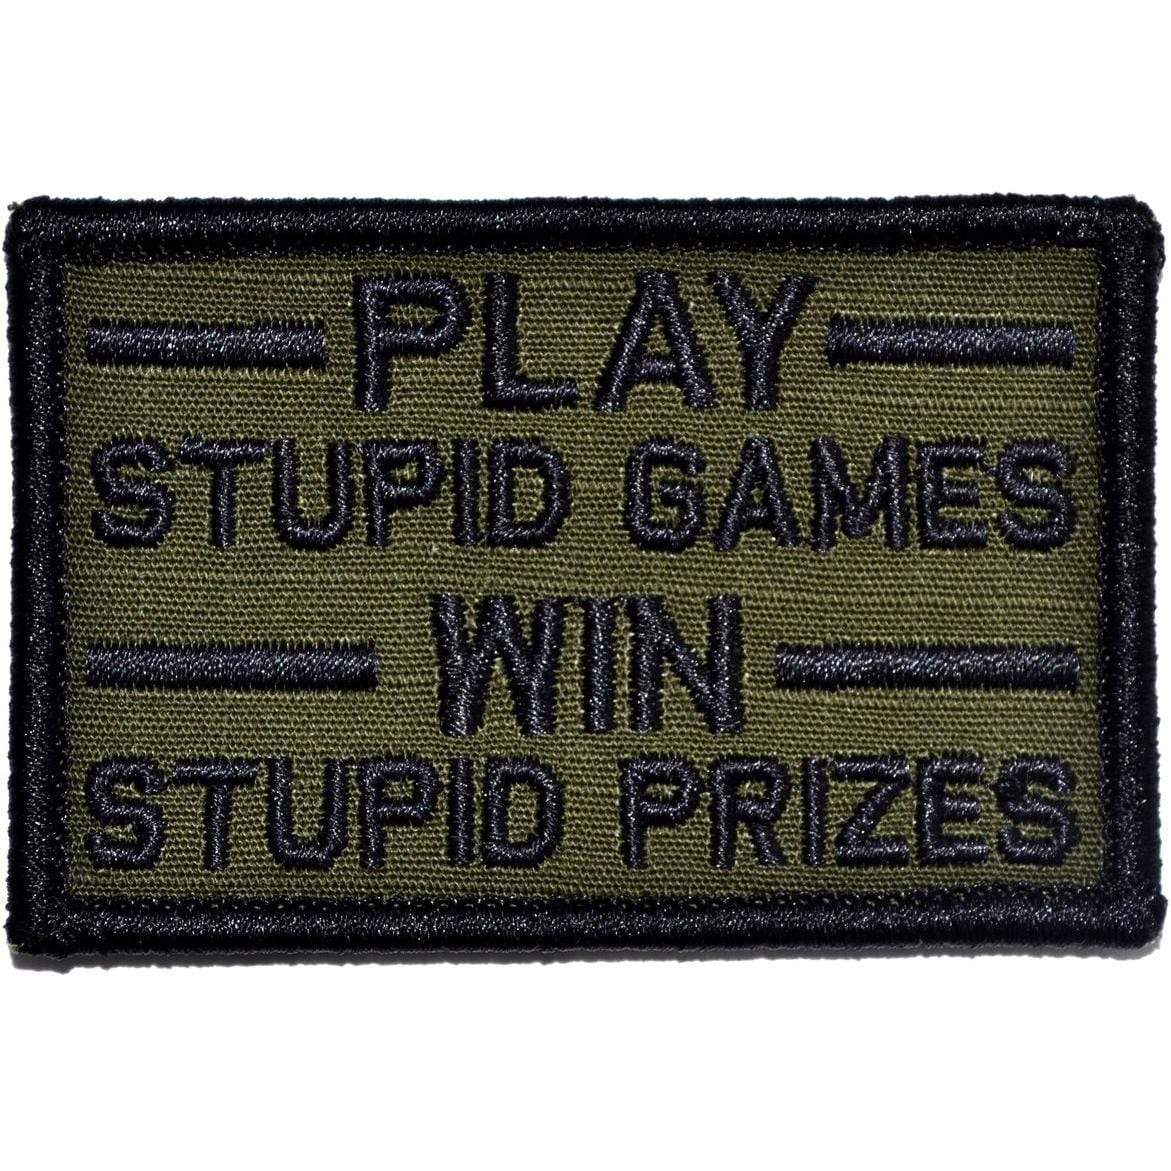 Tactical Gear Junkie Patches Olive Drab Play Stupid Games, Win Stupid Prizes - 2x3 Patch